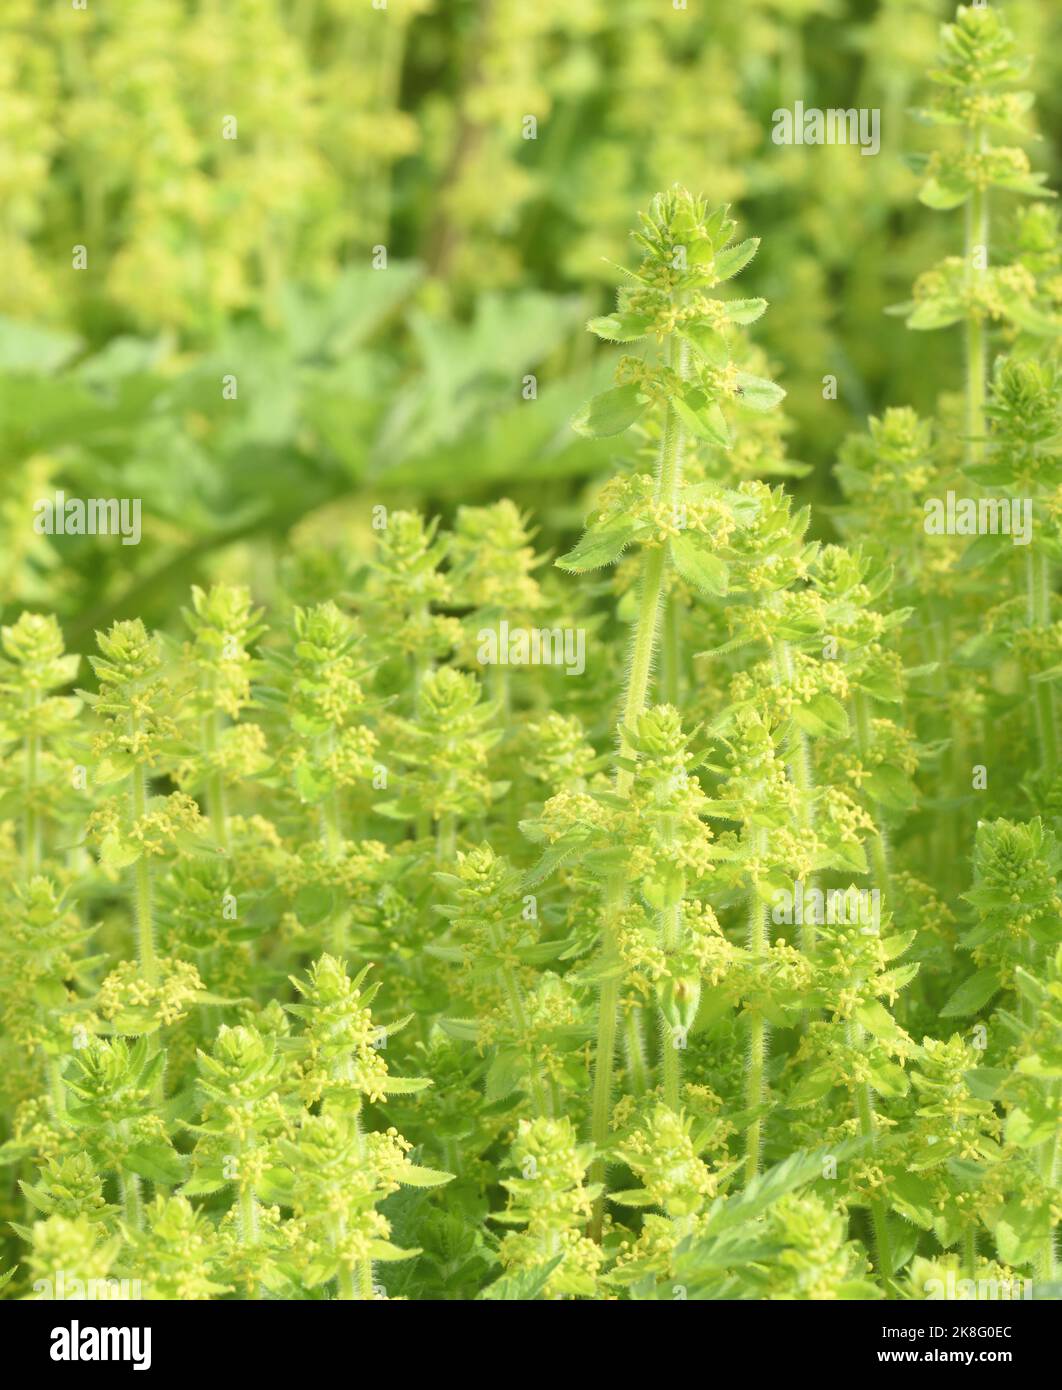 Honey-scented yellow flowers of crosswort (Cruciata laevipes), also known as smooth bedstraw, rmaywort or maiden's hair, growing by a roadside in Cumb Stock Photo